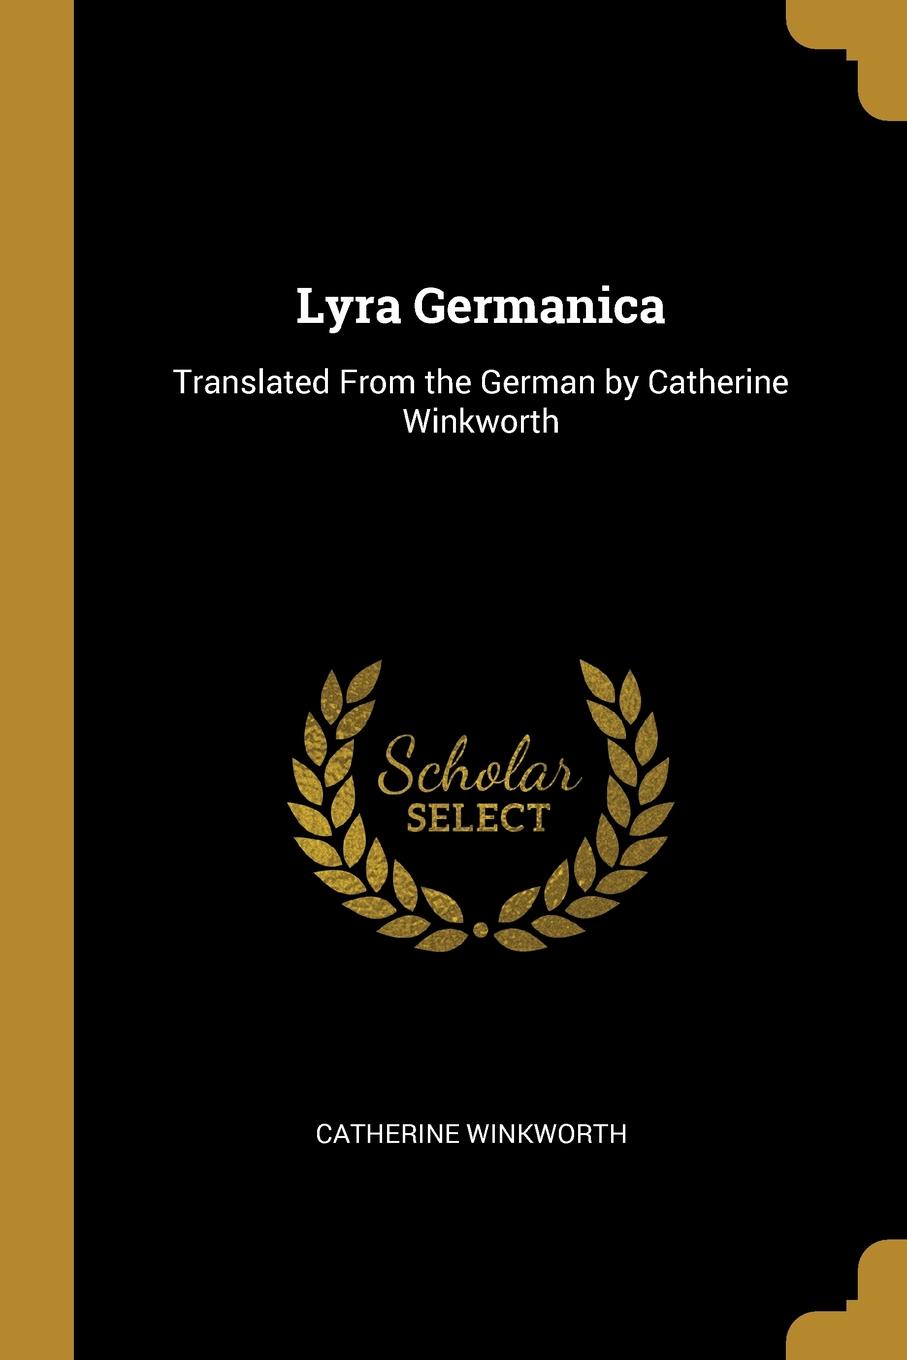 Lyra Germanica. Translated From the German by Catherine Winkworth